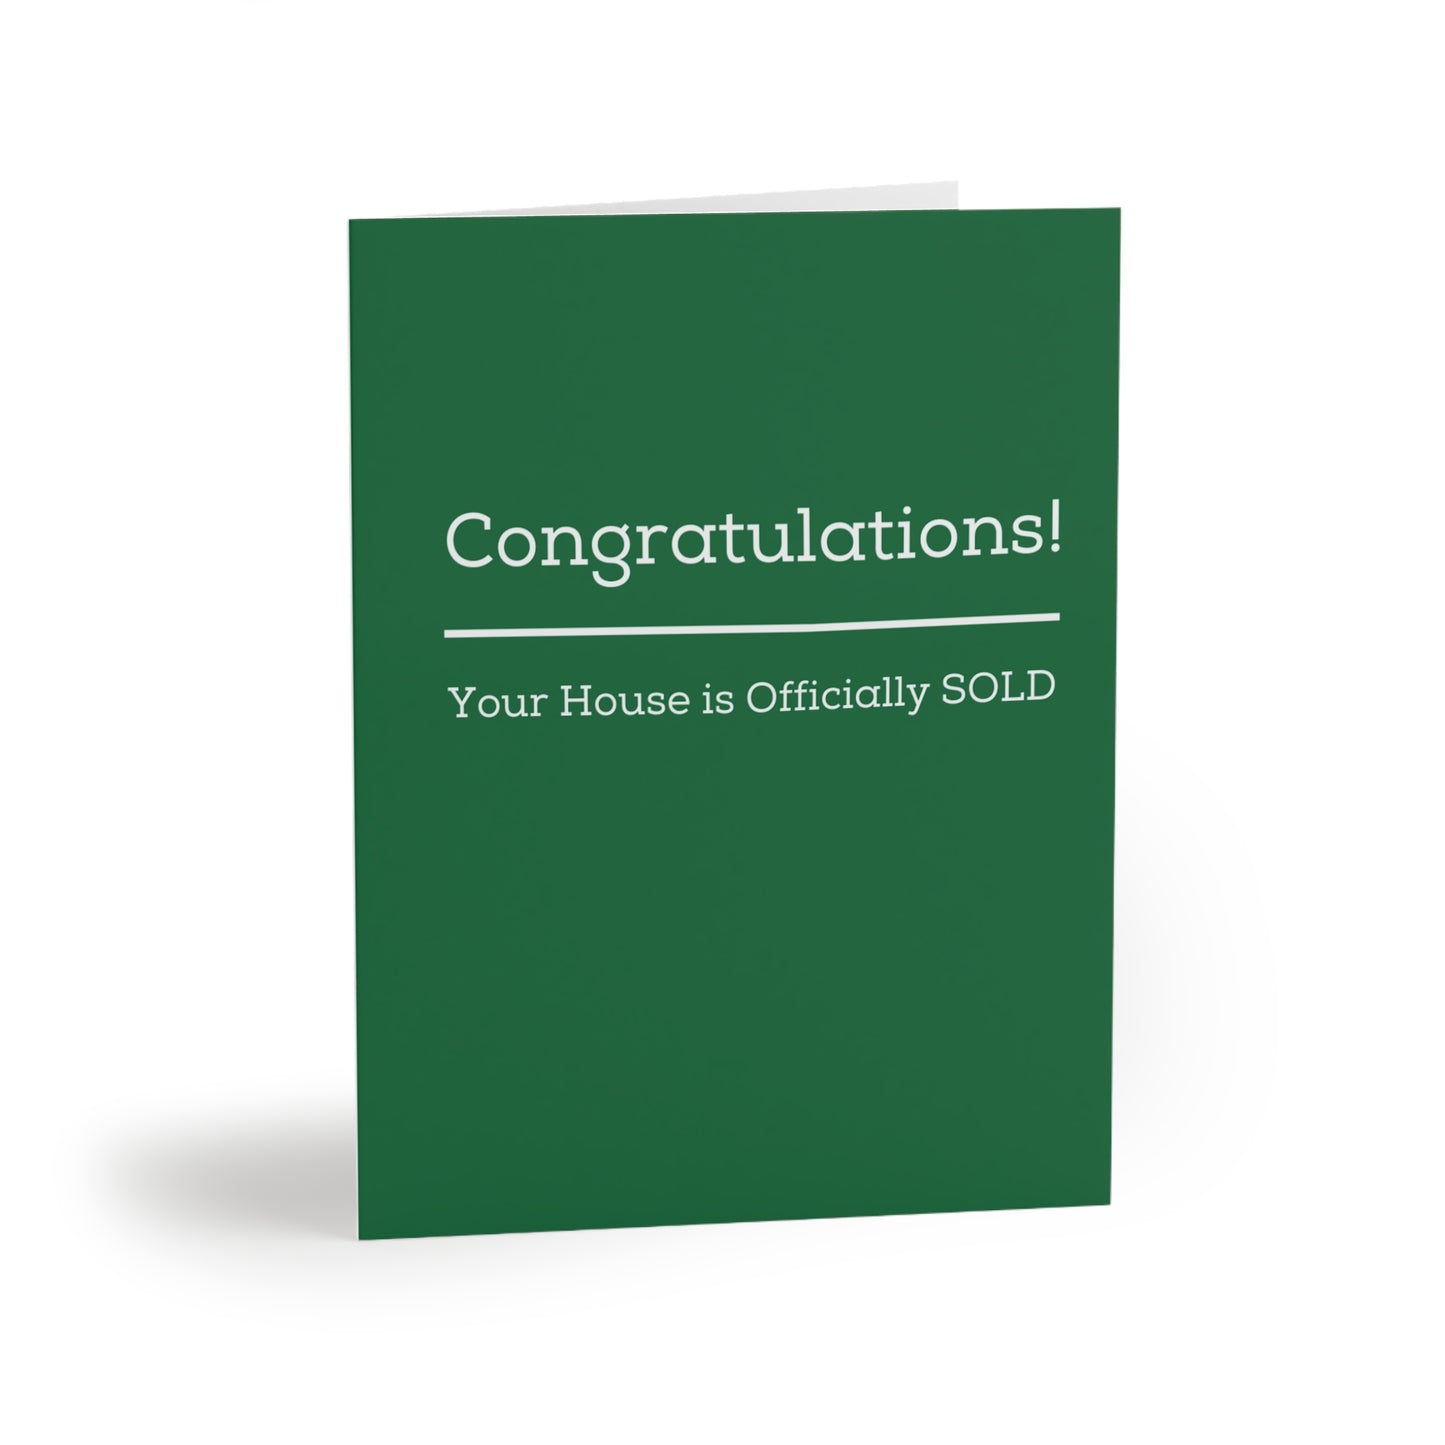 "Your House is SOLD" Green - Cards for Real Estate Agents (8, 16, and 24 pcs)